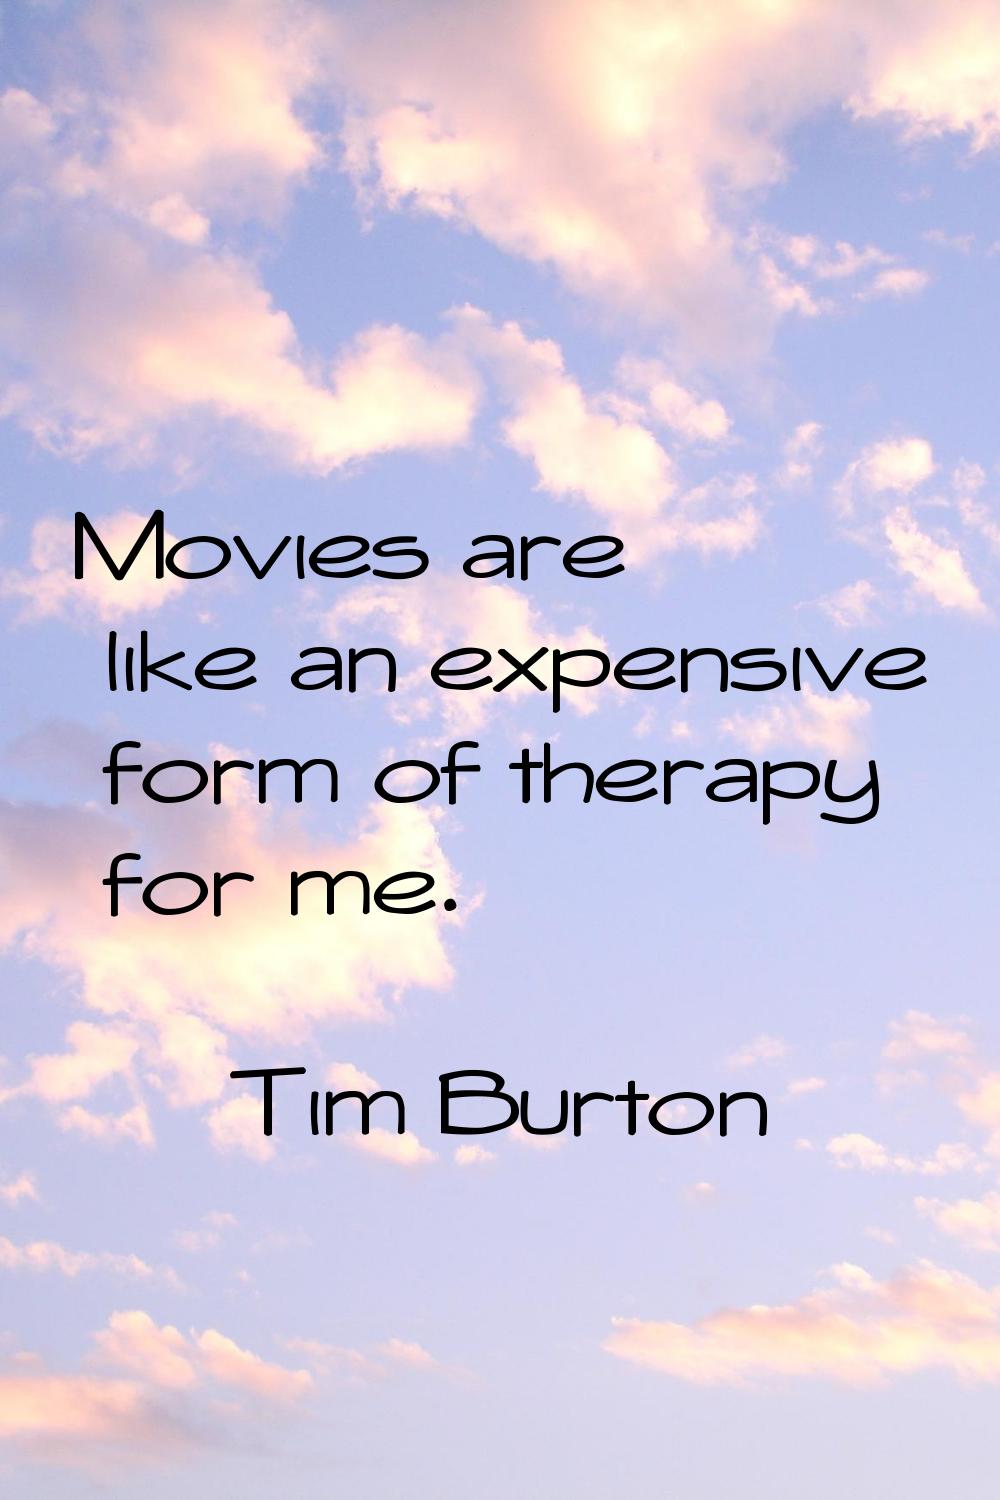 Movies are like an expensive form of therapy for me.